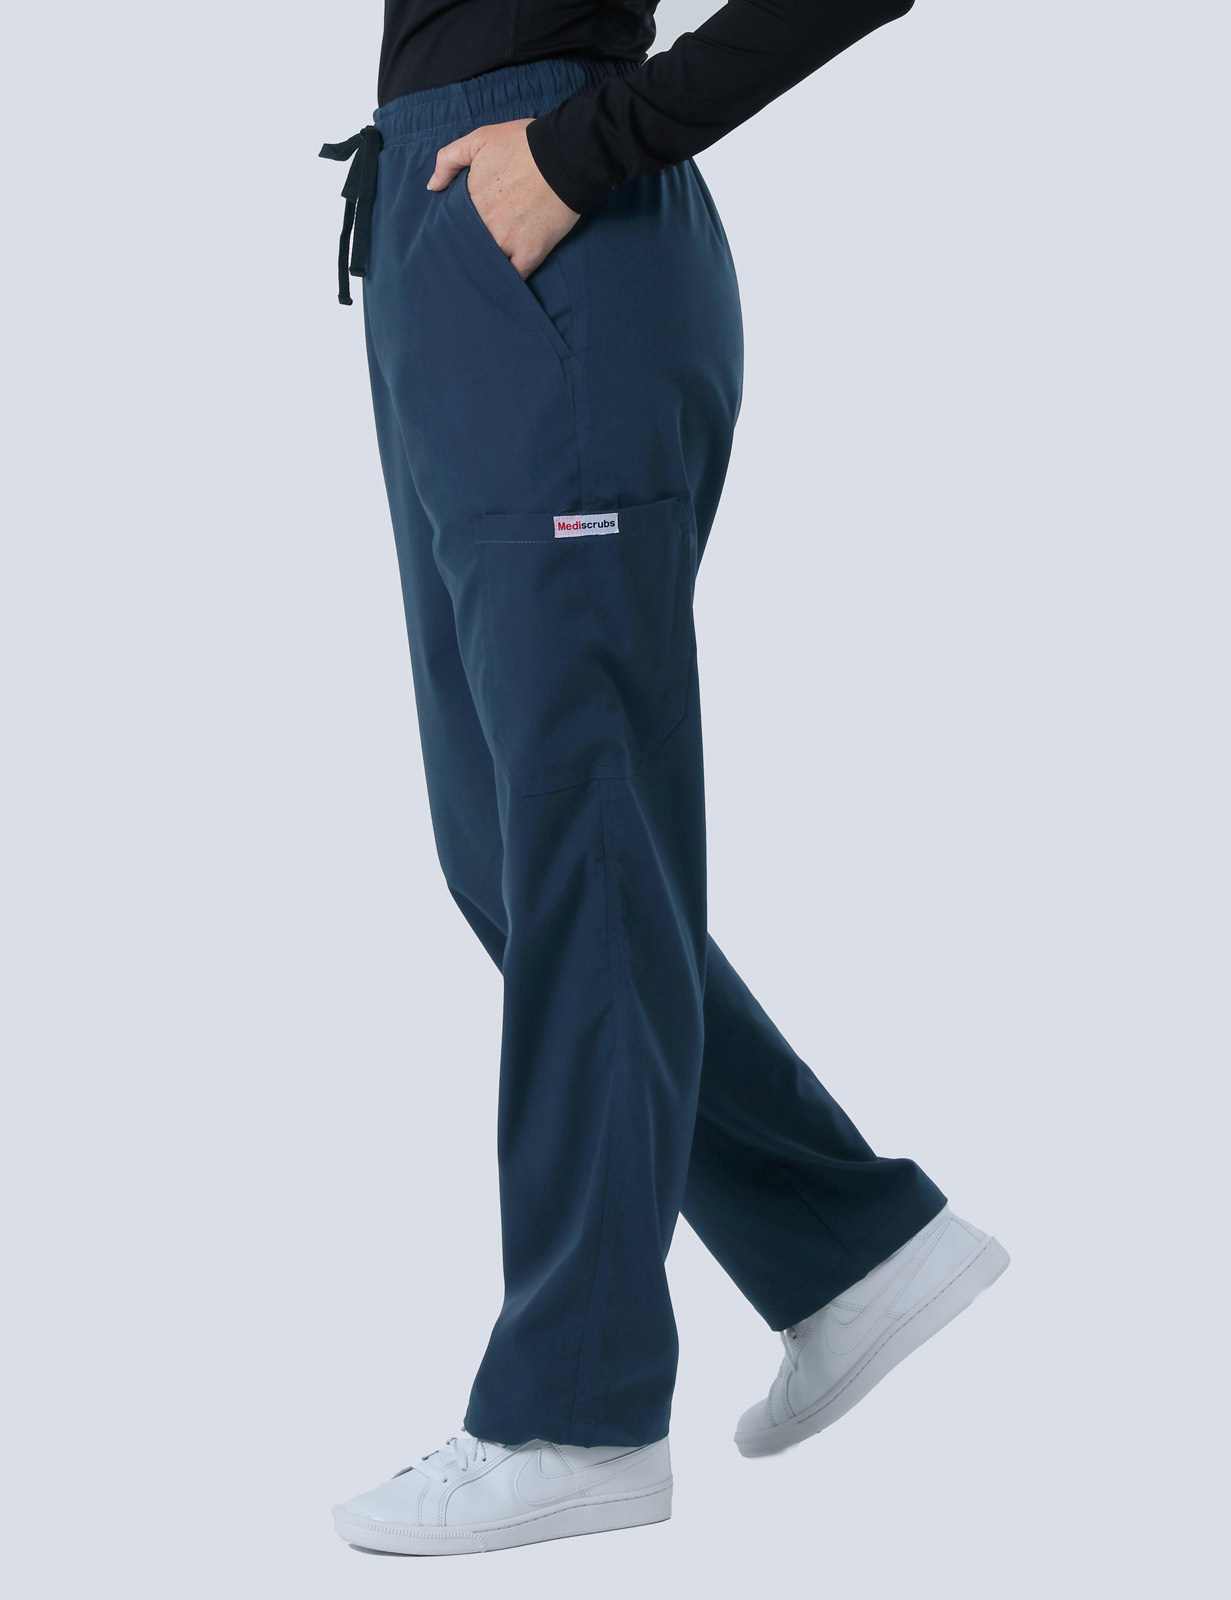 Peninsula Health Frankston - 4GN Nurse (Women's Fit Solid Scrub Top and Cargo Pants in Navy incl Logos)